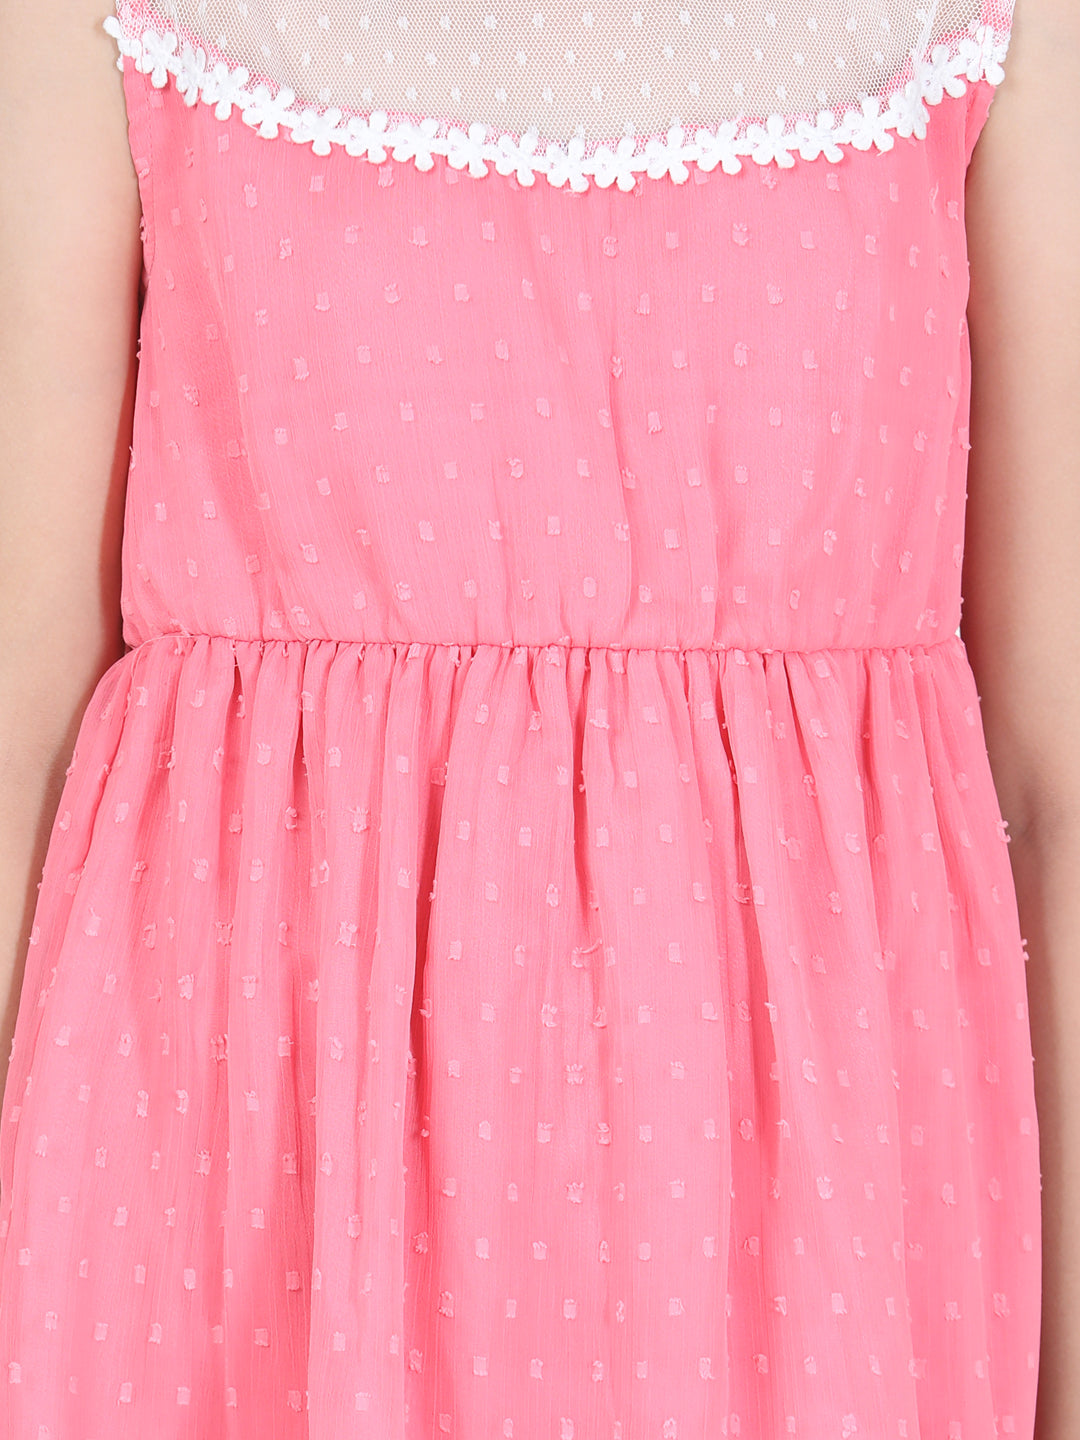 Girls Coral Pink Polyester Self Design Dress with Net and Lace Inserts